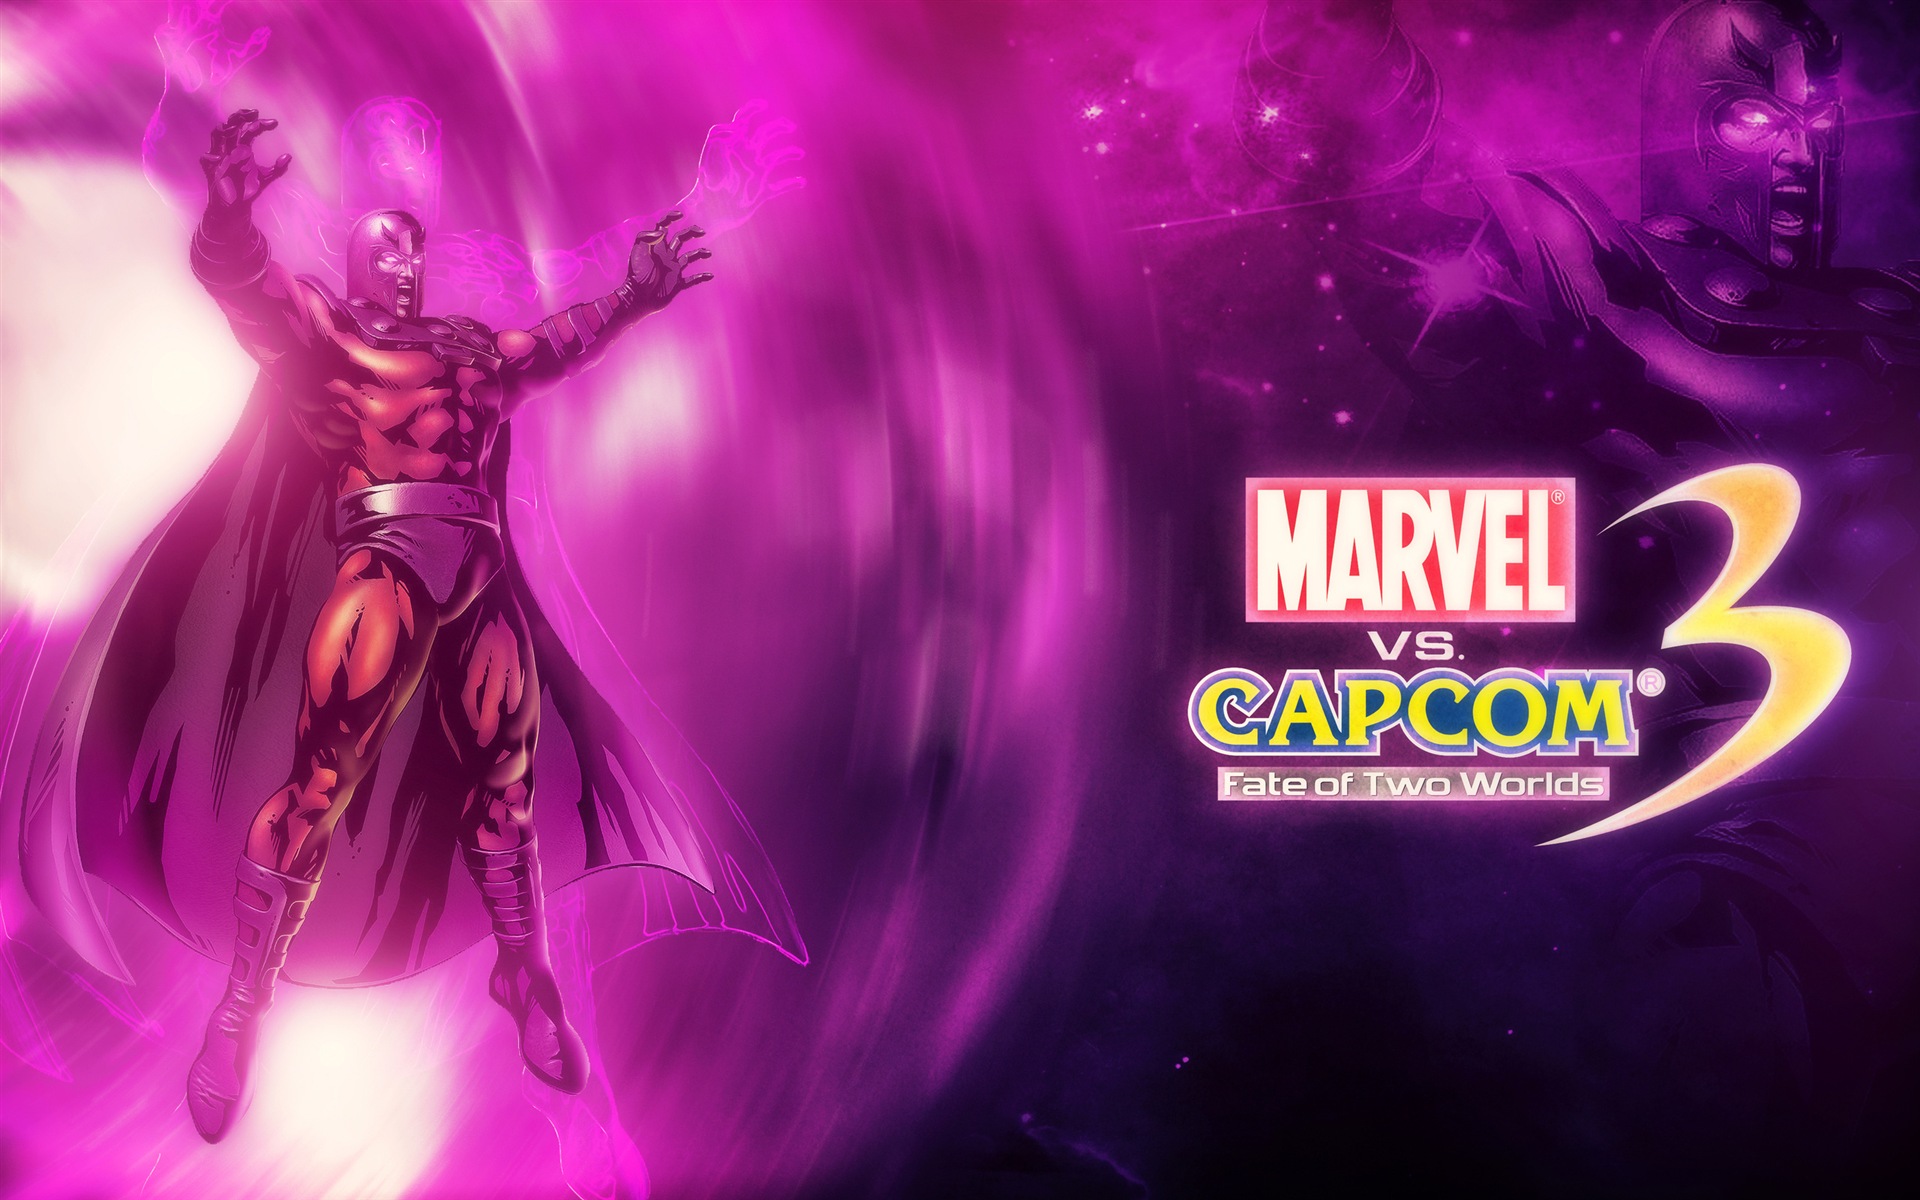 Marvel VS. Capcom 3: Fate of Two Worlds HD game wallpapers #7 - 1920x1200